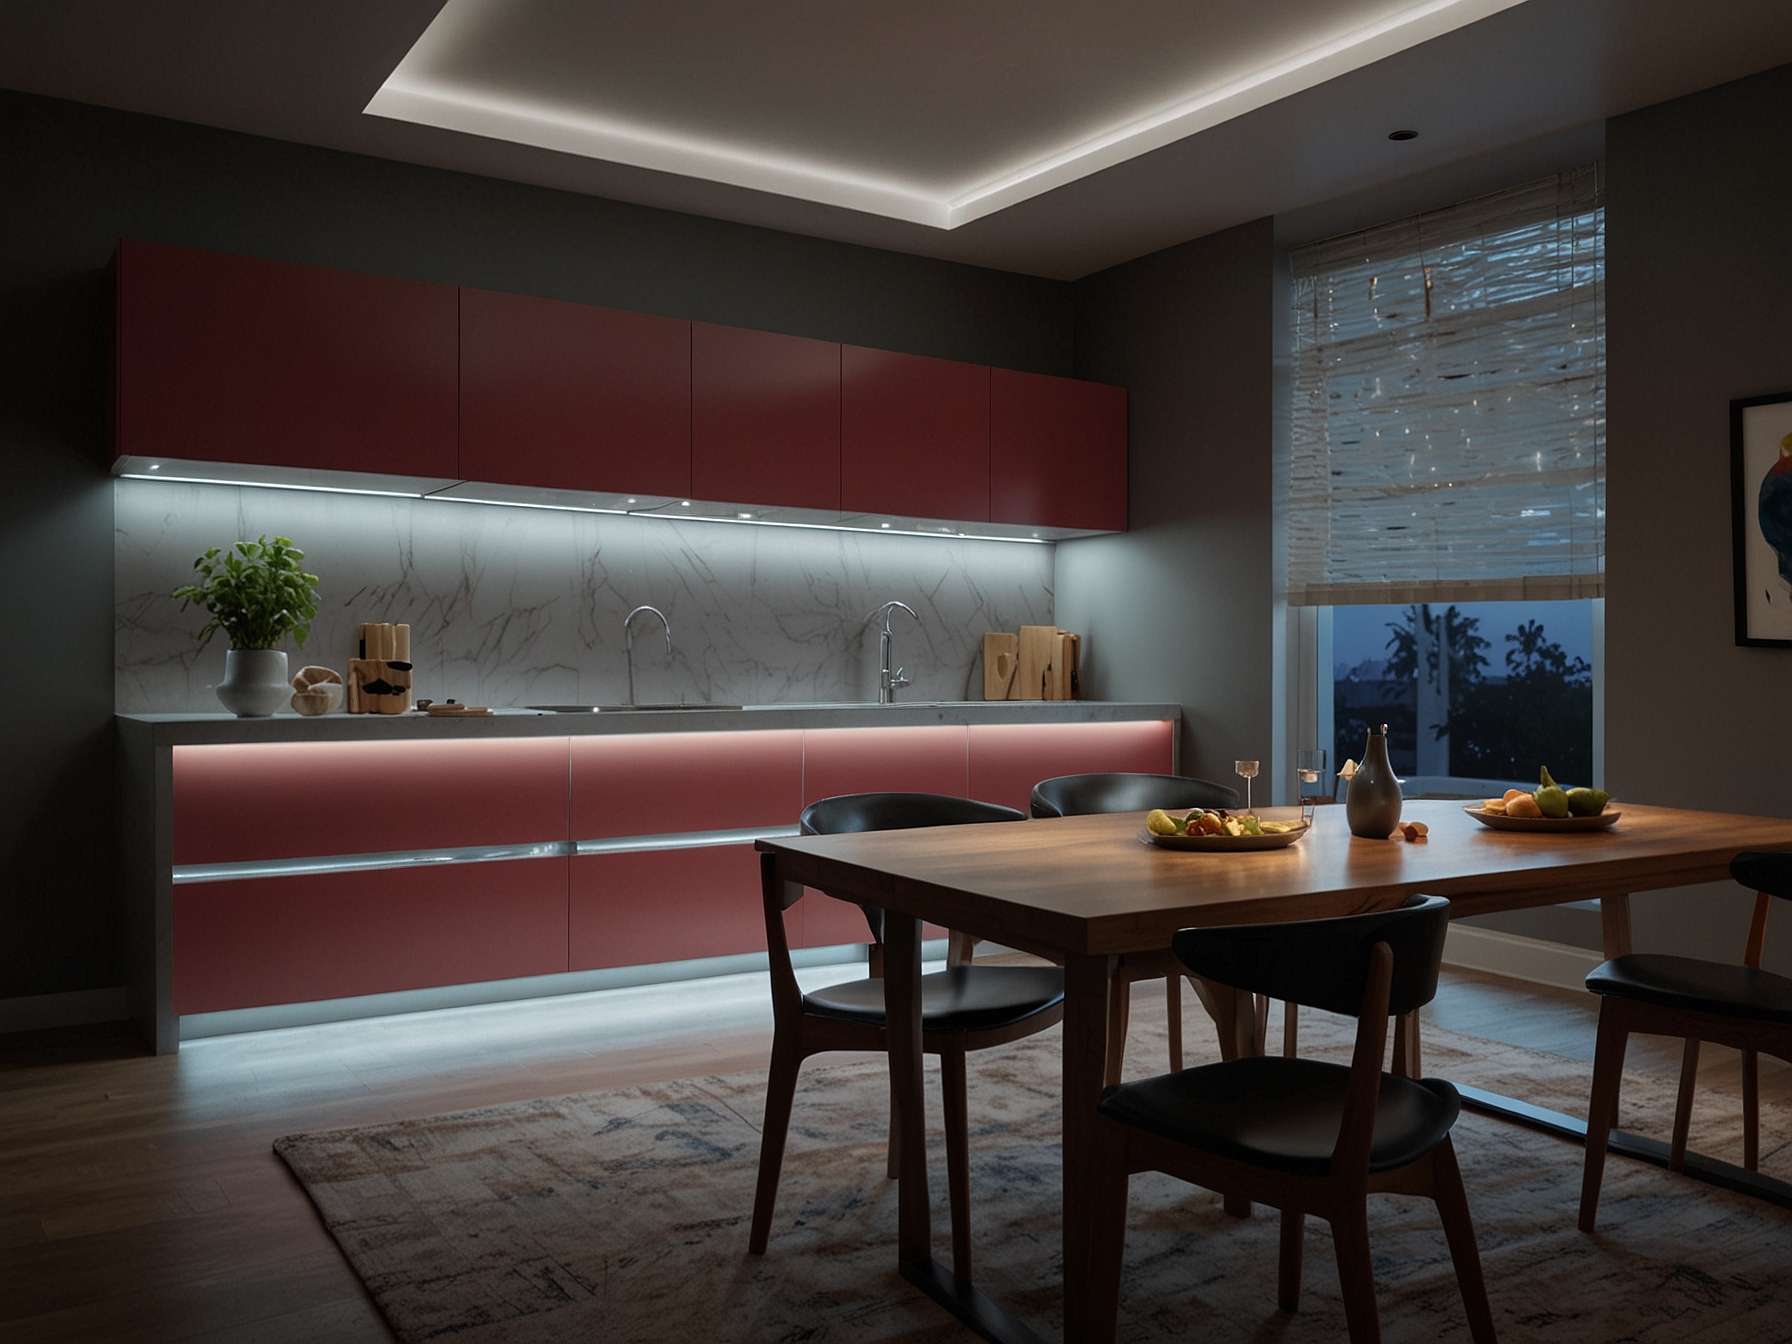 An image of a modern kitchen with GE Cync under cabinet lights installed, illuminating the workspace with customizable colors, demonstrating the light's sleek design and versatility.